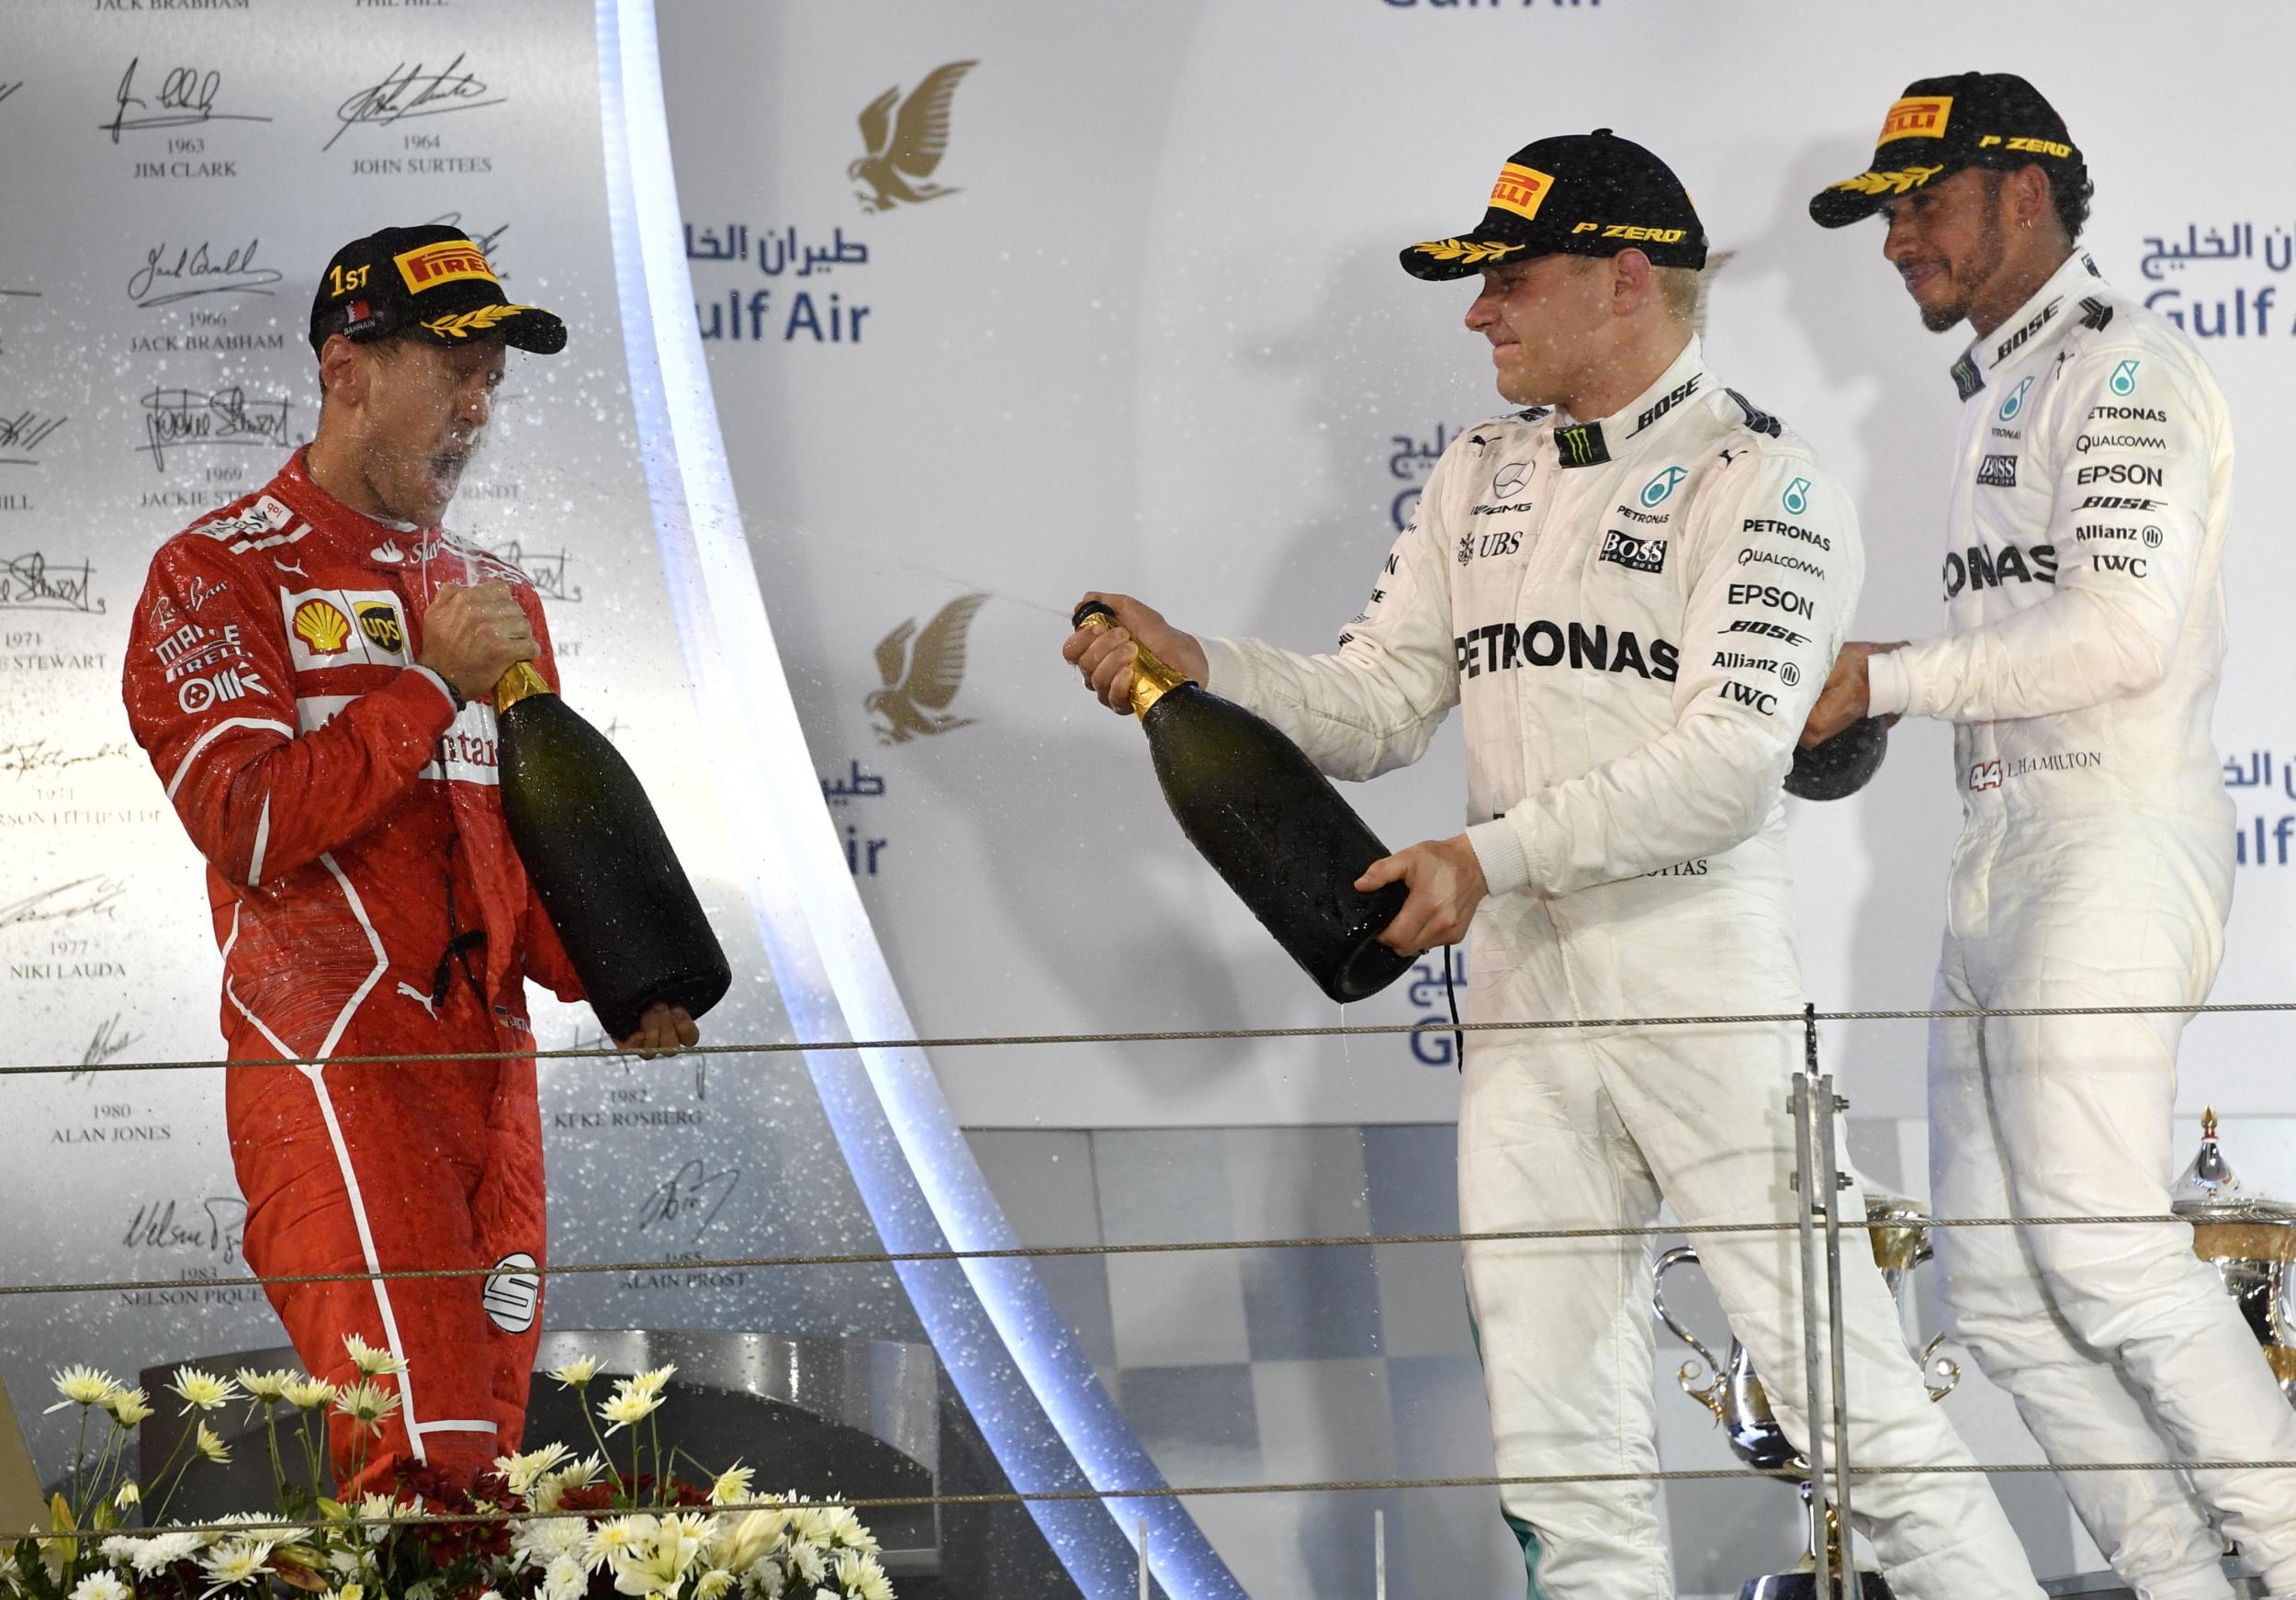 Hamilton was left underwhelmed with second place